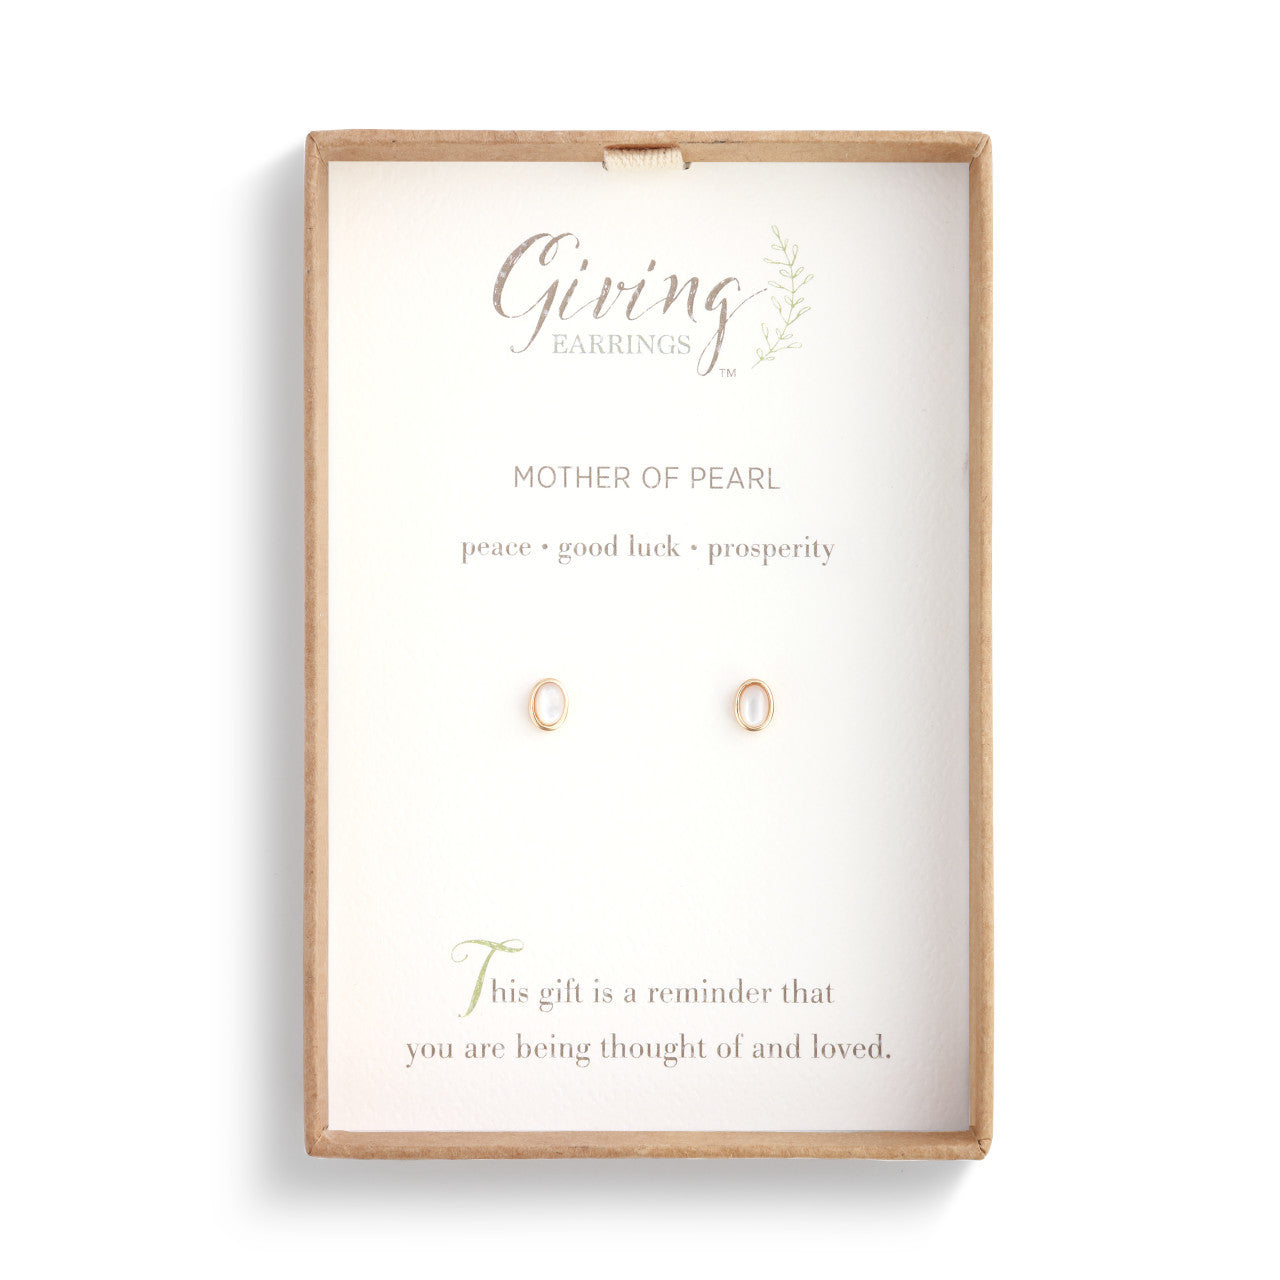 The Gold Giving Earrings